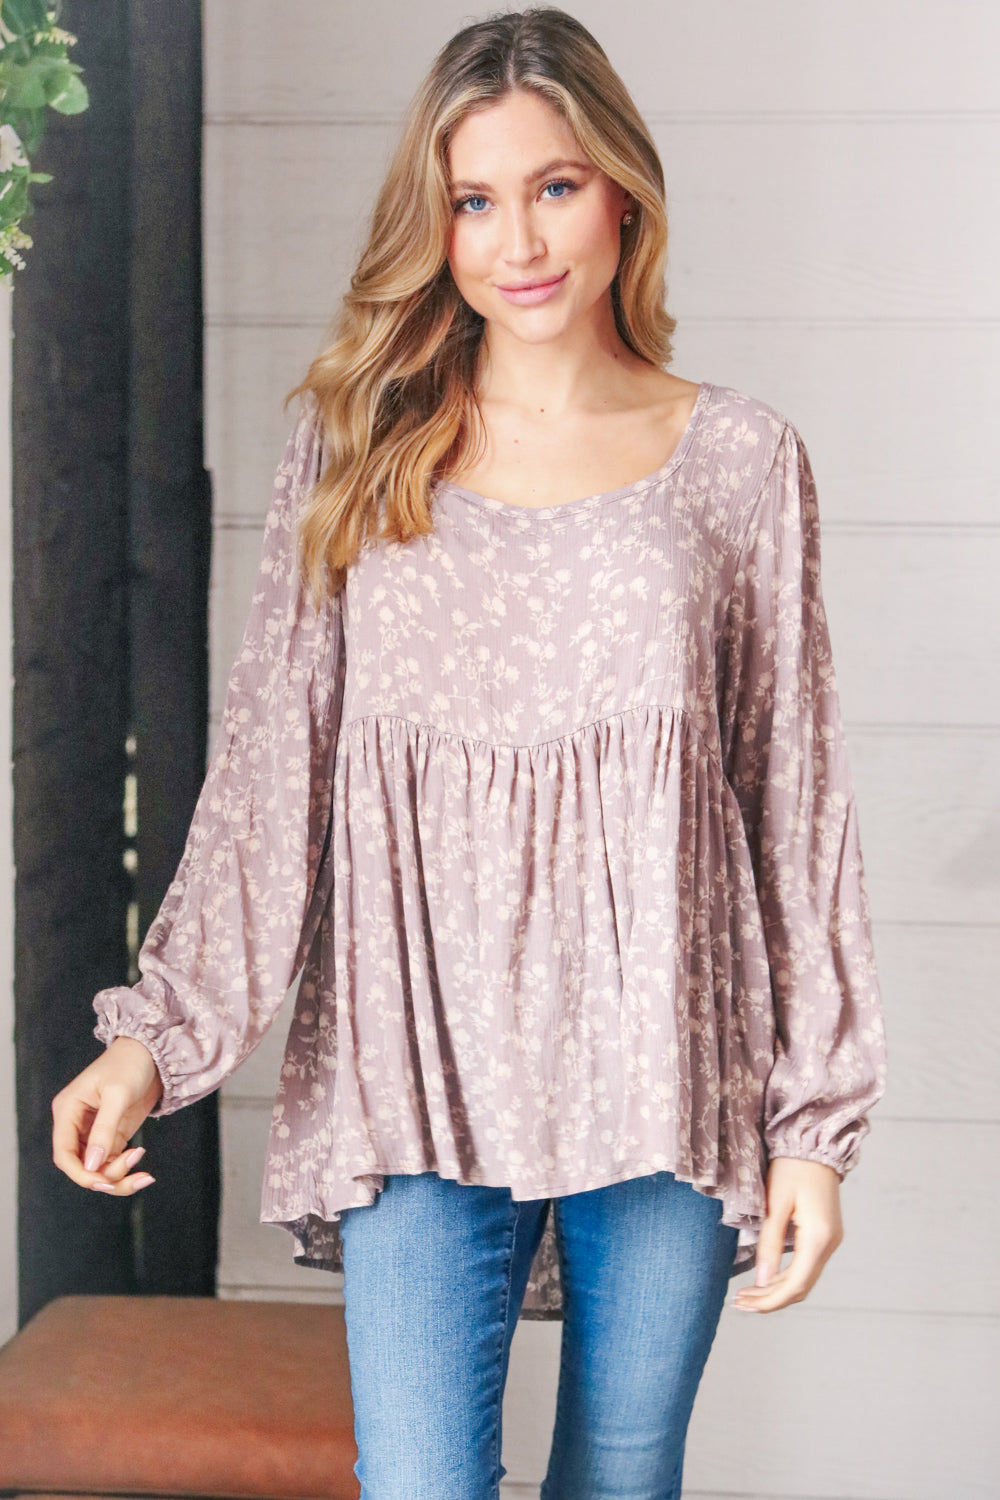 Best of You Floral Lace-Up Baby Doll Blouse Small  